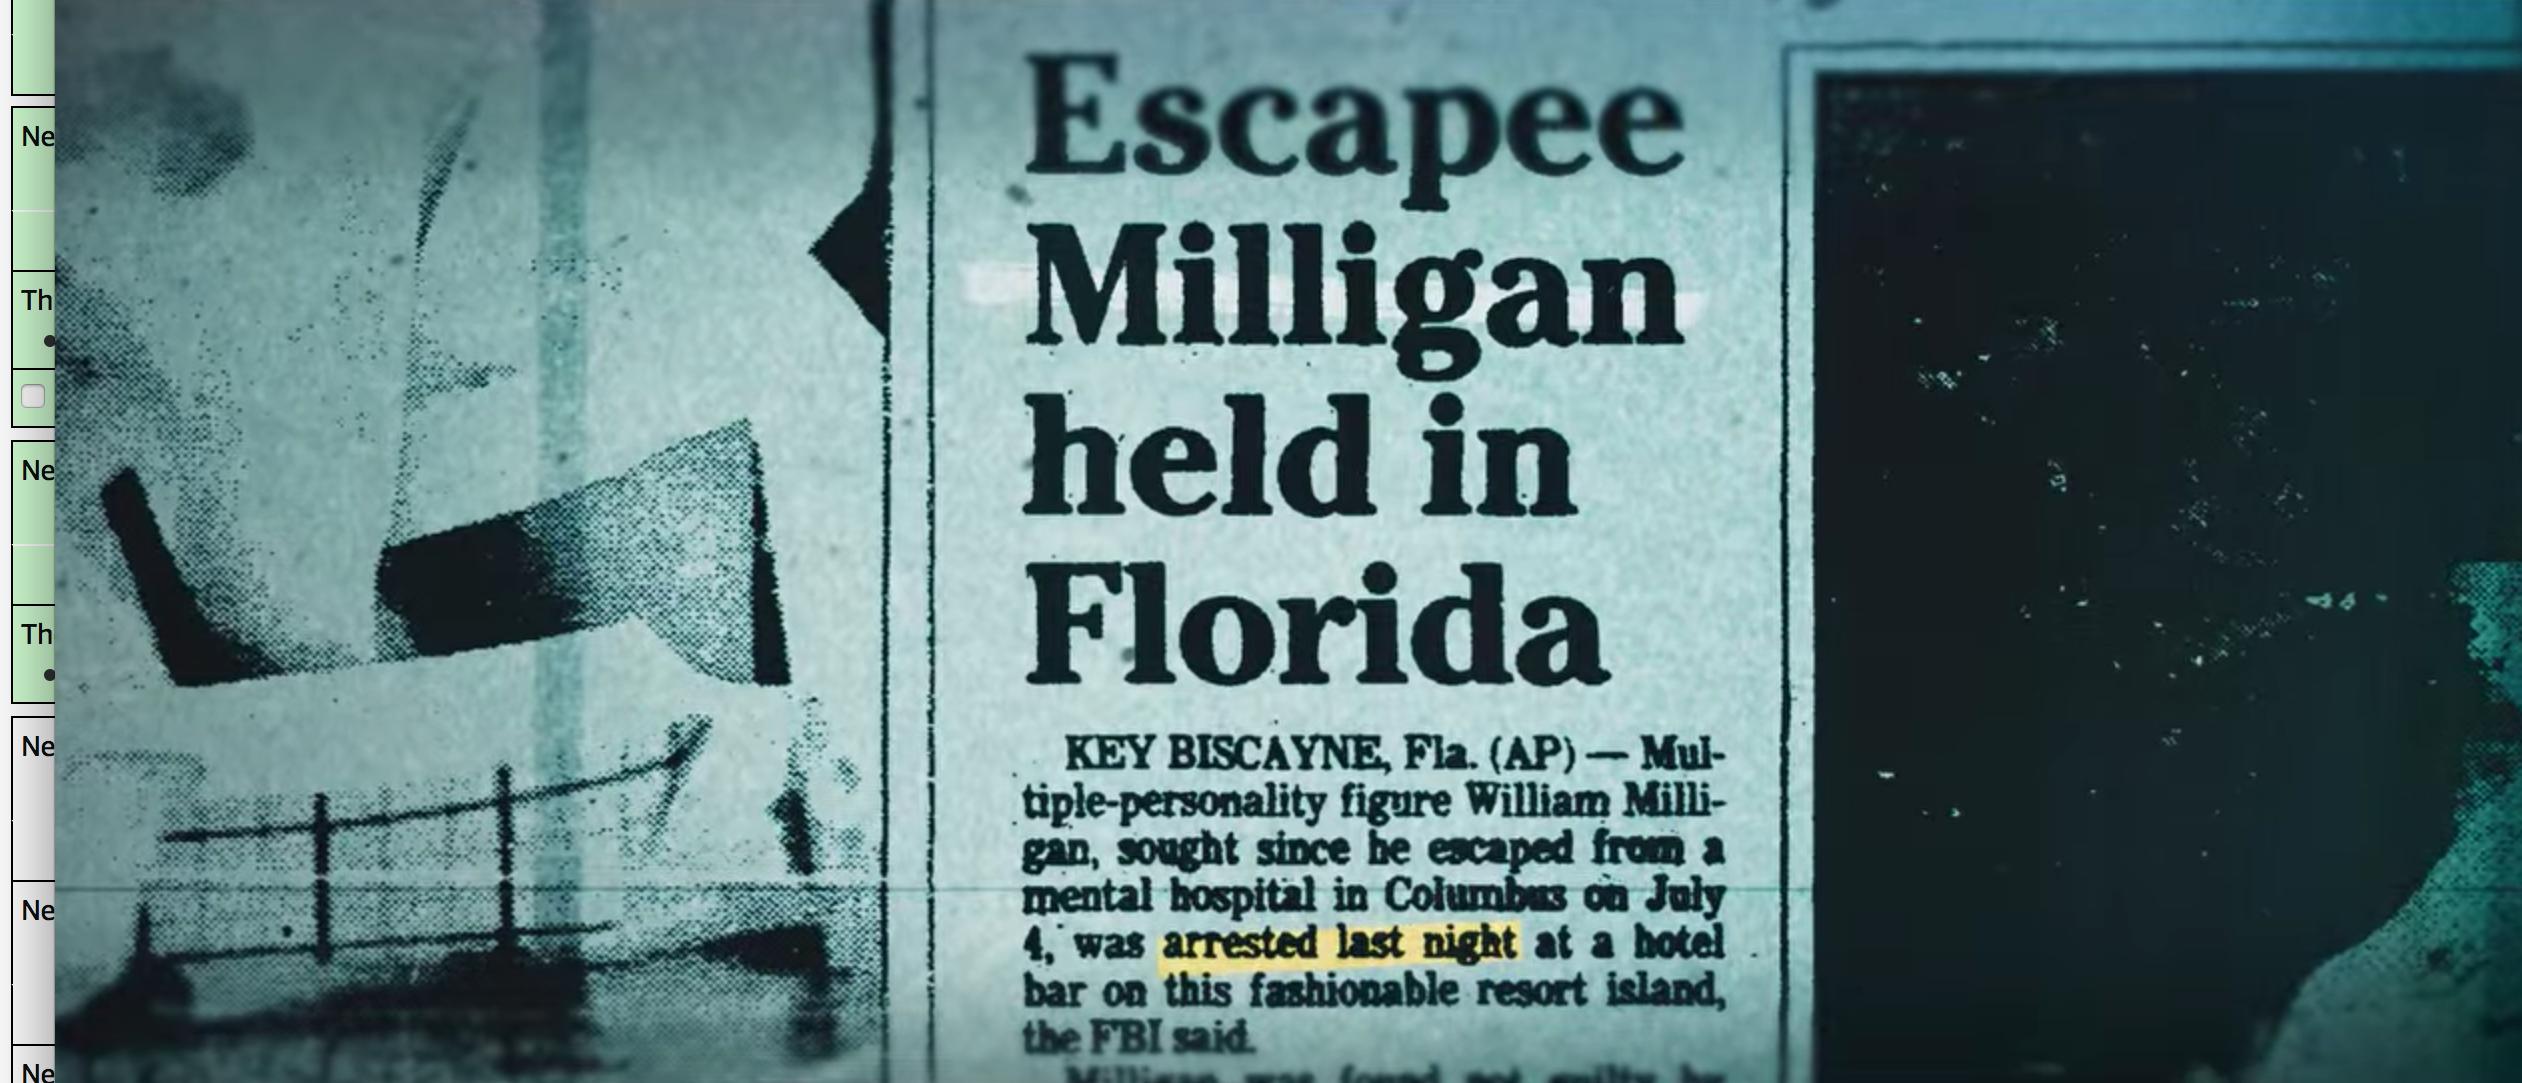 Monsters Inside: The 24 Faces of Billy Milligan: The Escape | Season 1 | Episode 4